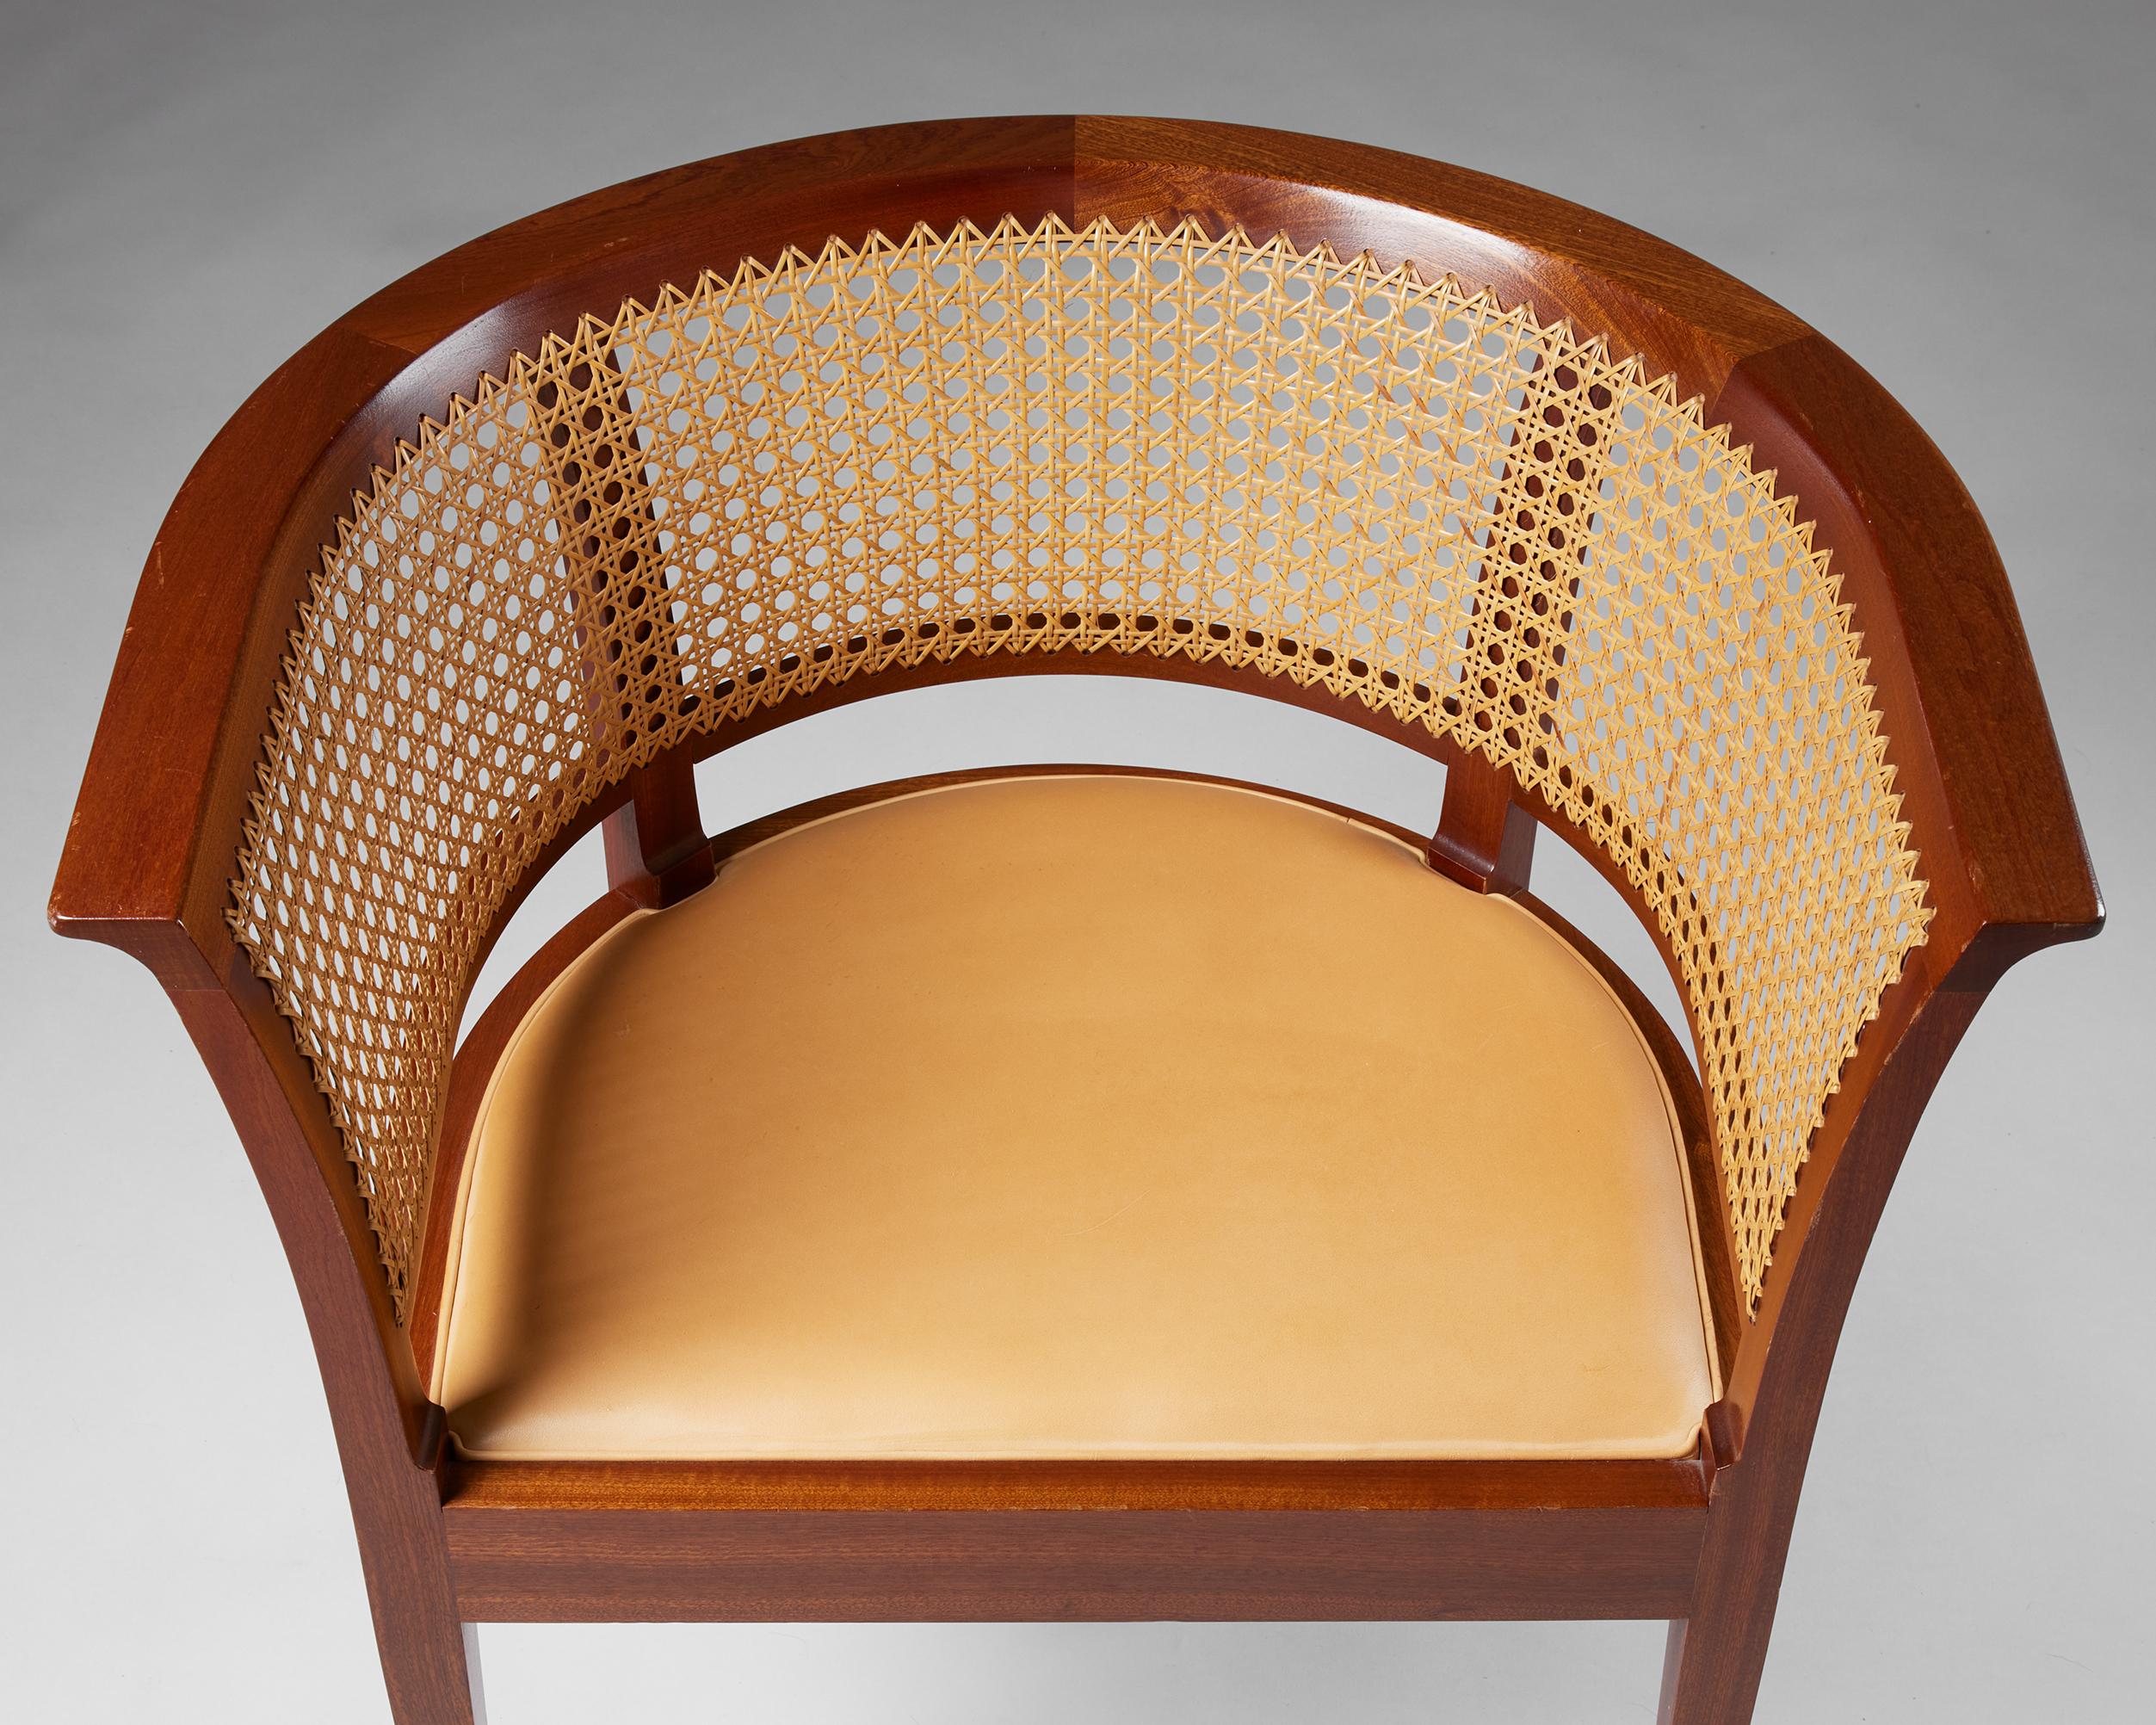 The Faaborg Chair